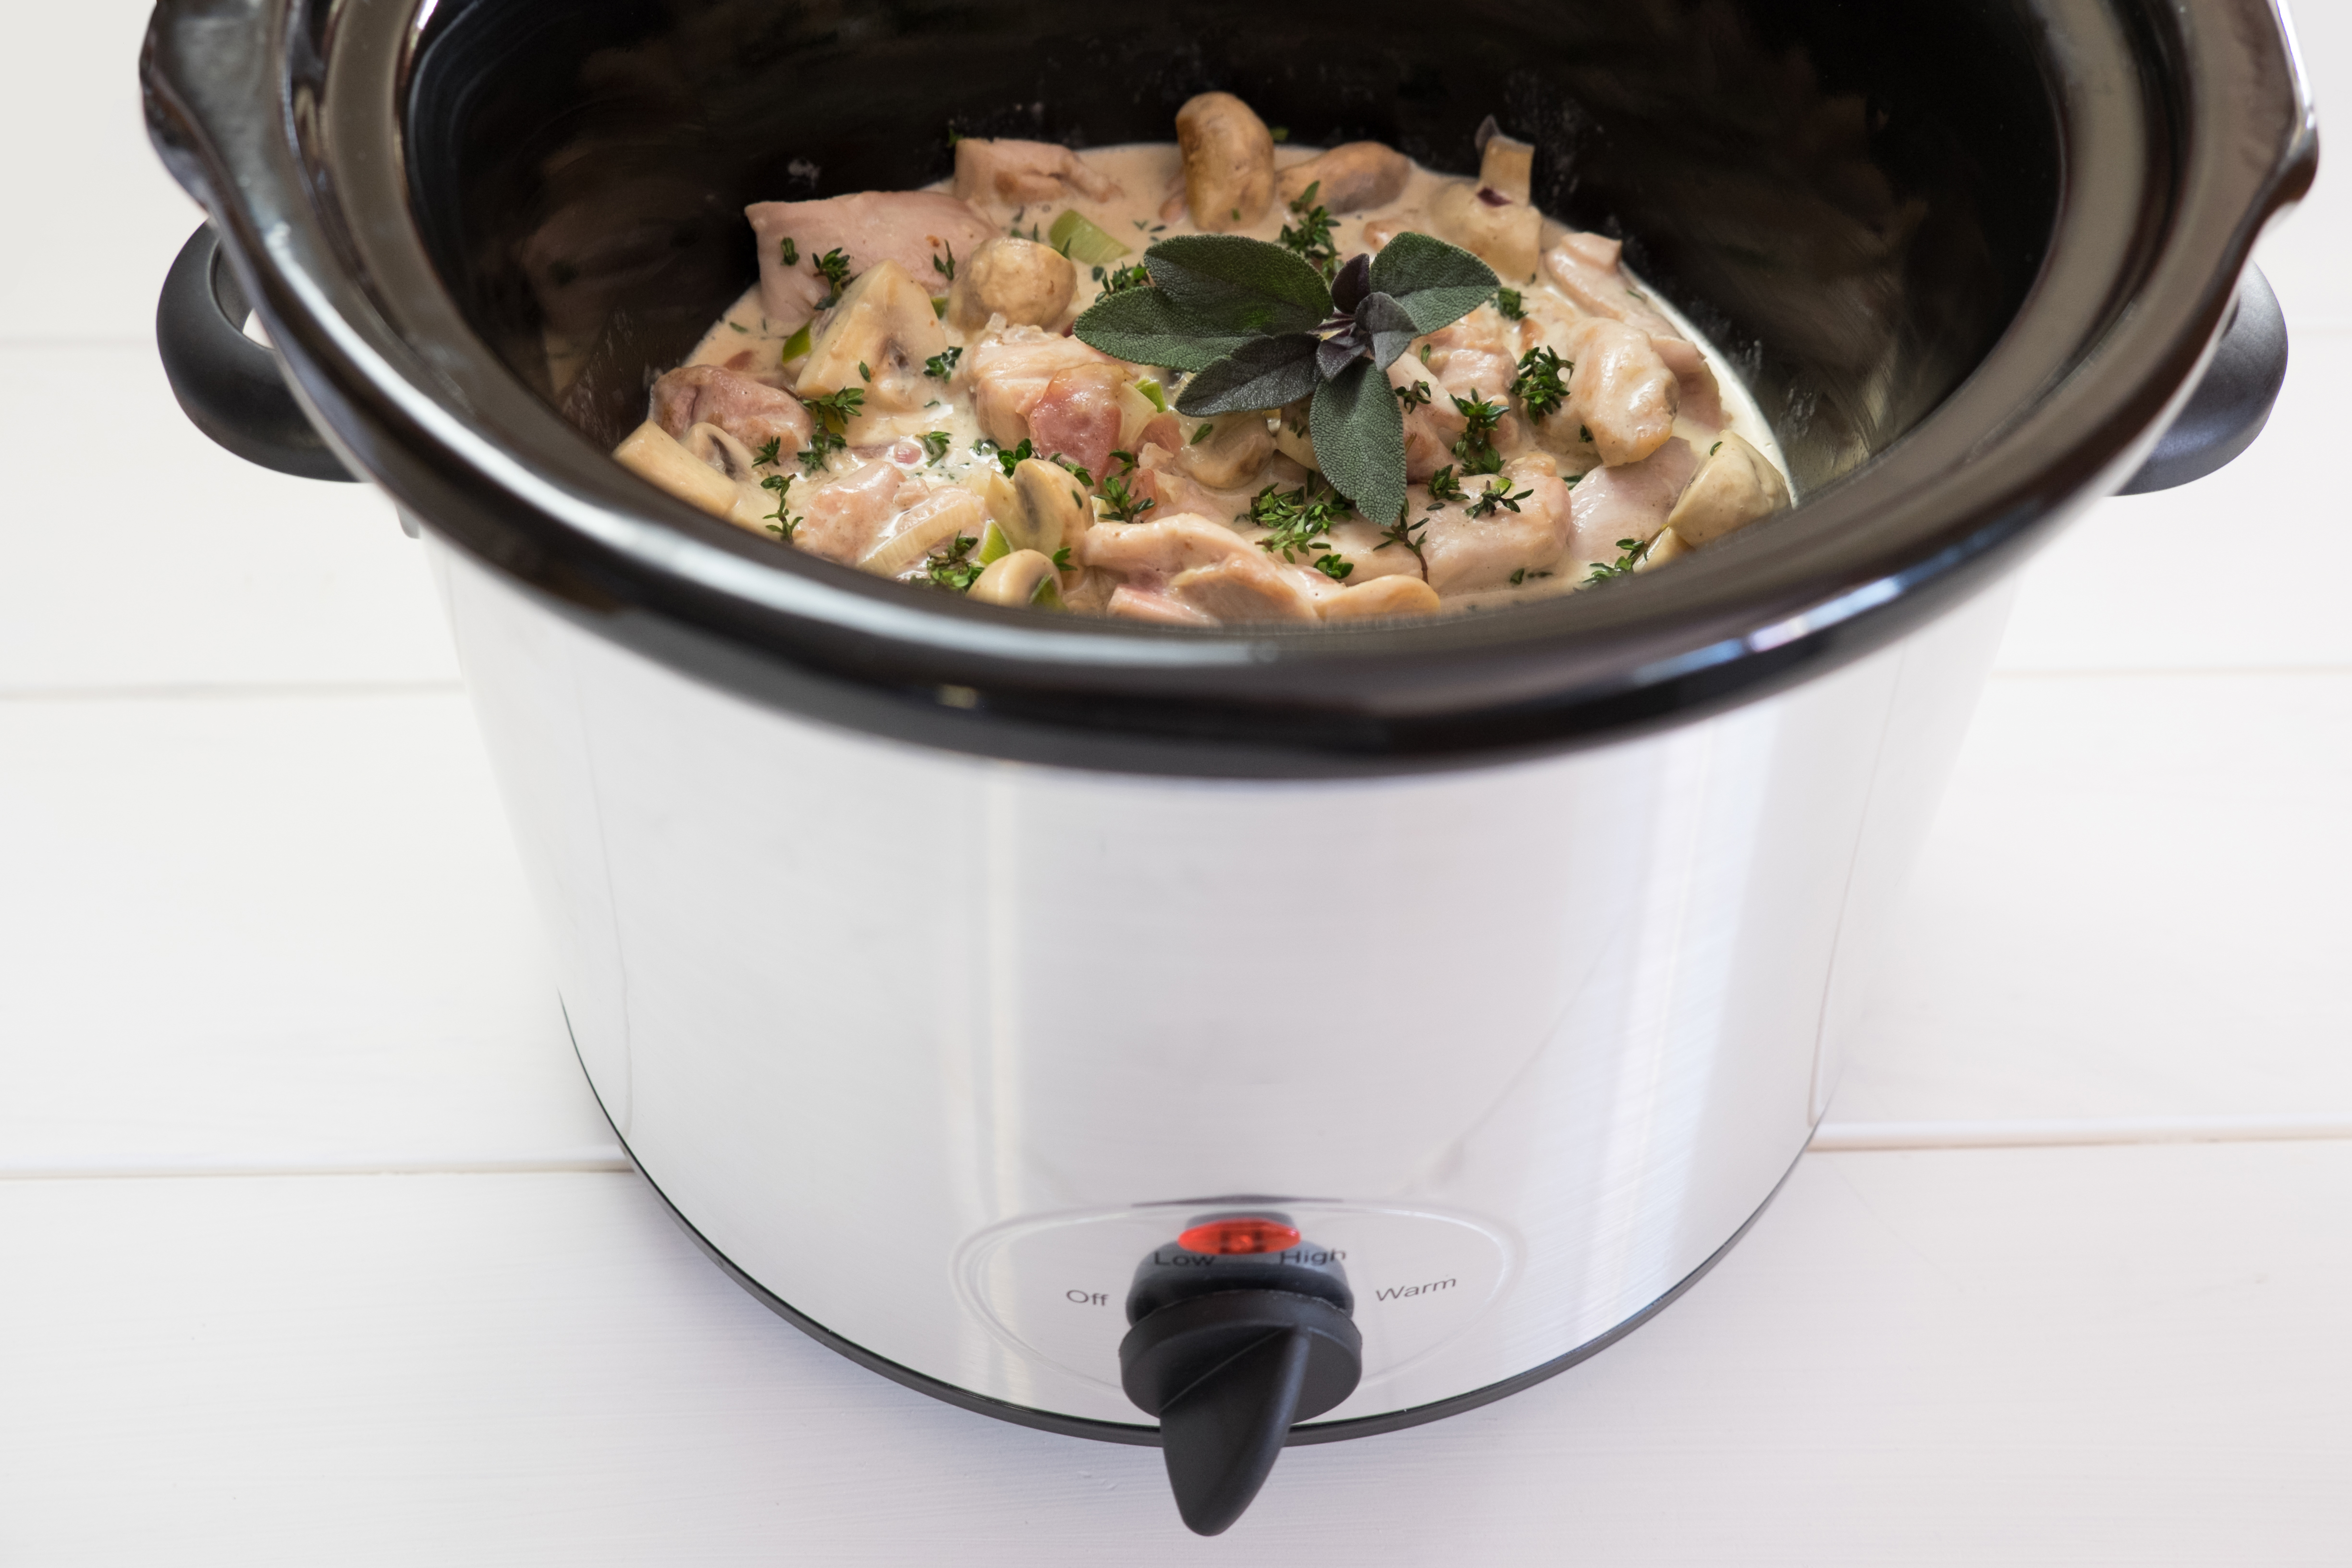 How To Get Rid Of That Nasty Smell In Your Instant Pot